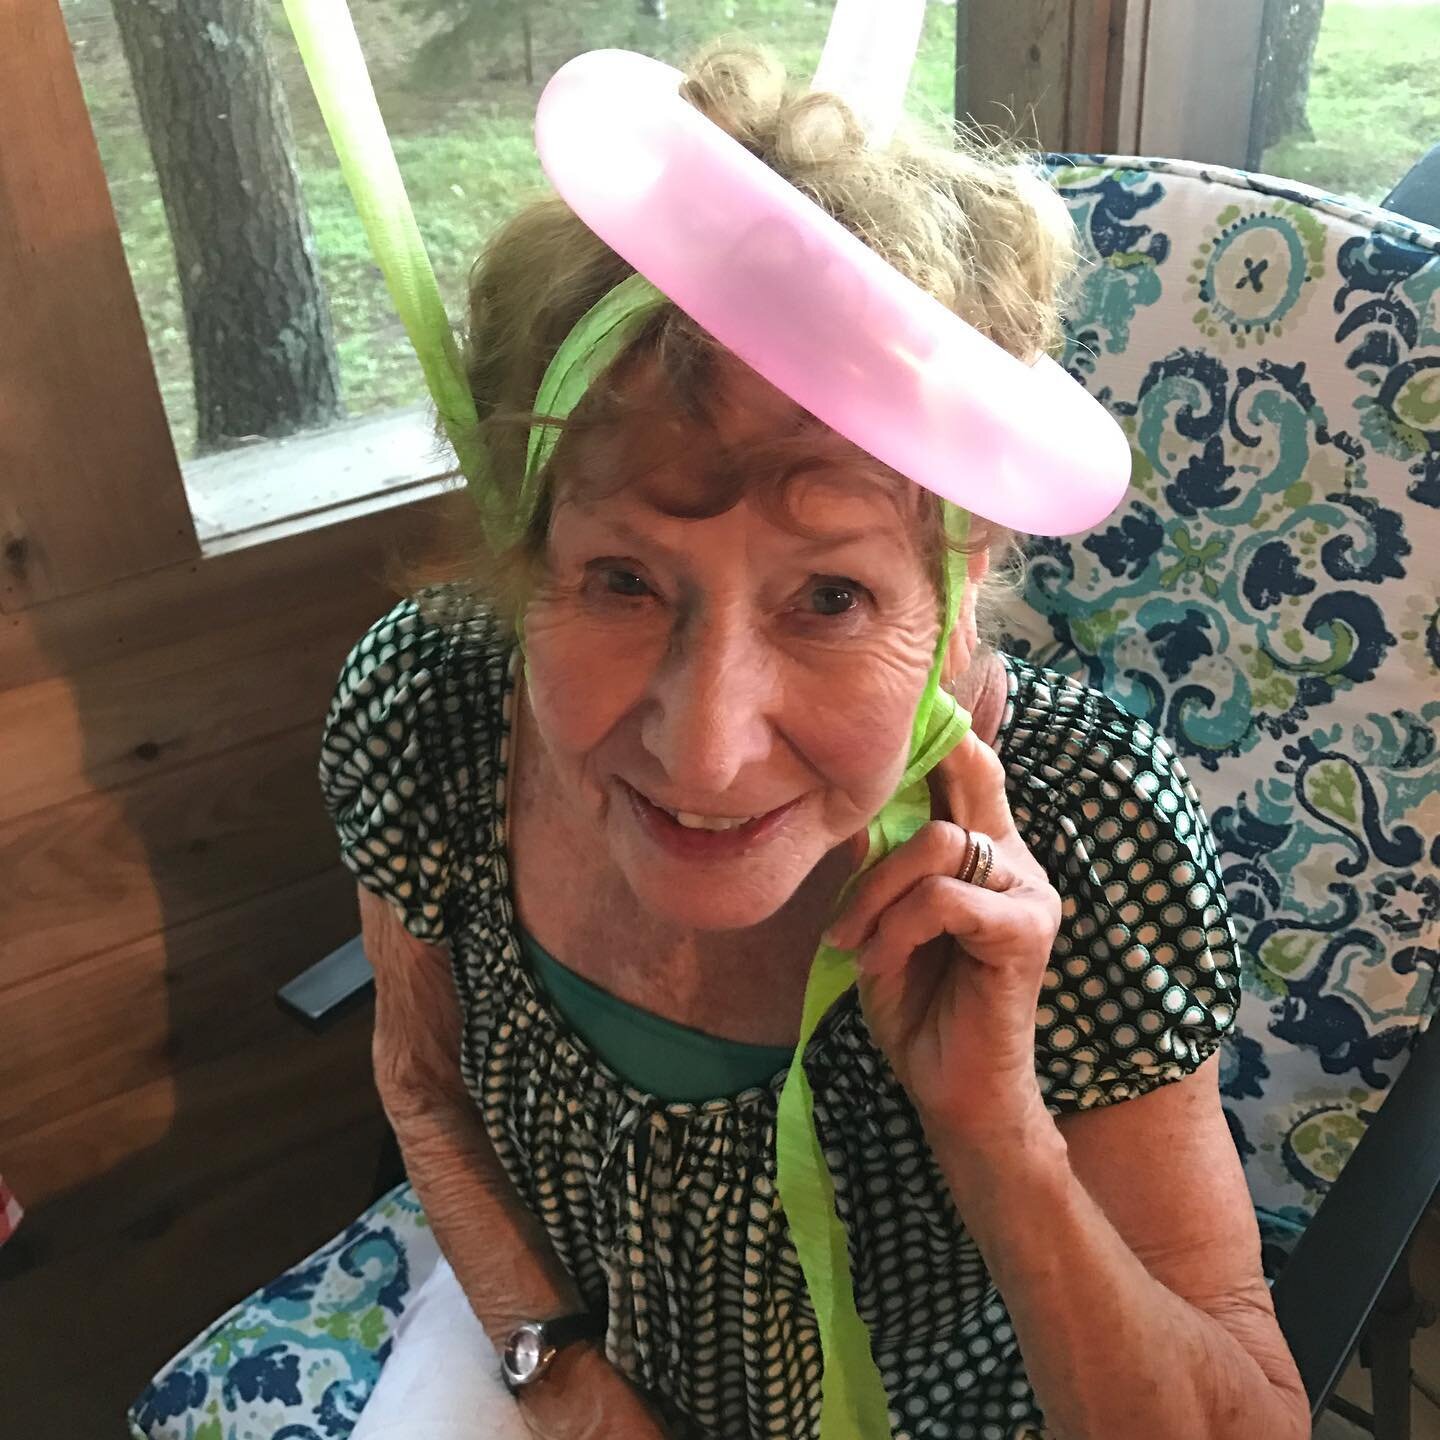 It&rsquo;s Annabelle&rsquo;s birthday! Grandma loved birthdays and celebrating others - we could also count on getting her famous birthday phone call (voicemails that I still have saved) even though she&rsquo;s no longer here we still celebrate her a